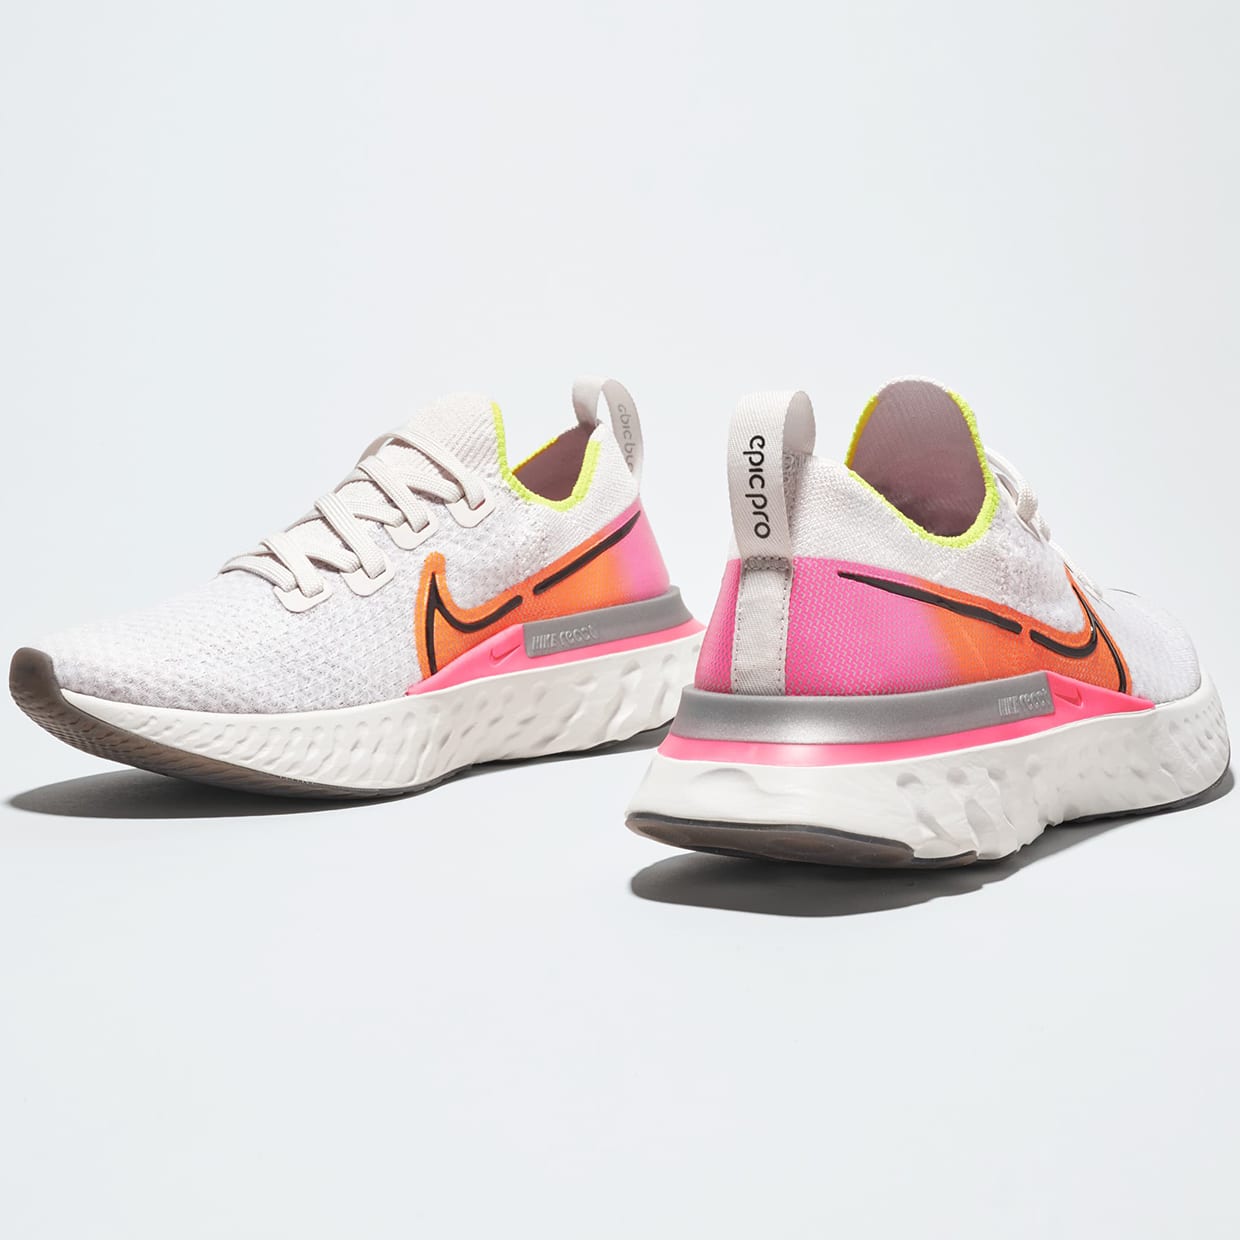 A pair of multicolor running shoes.